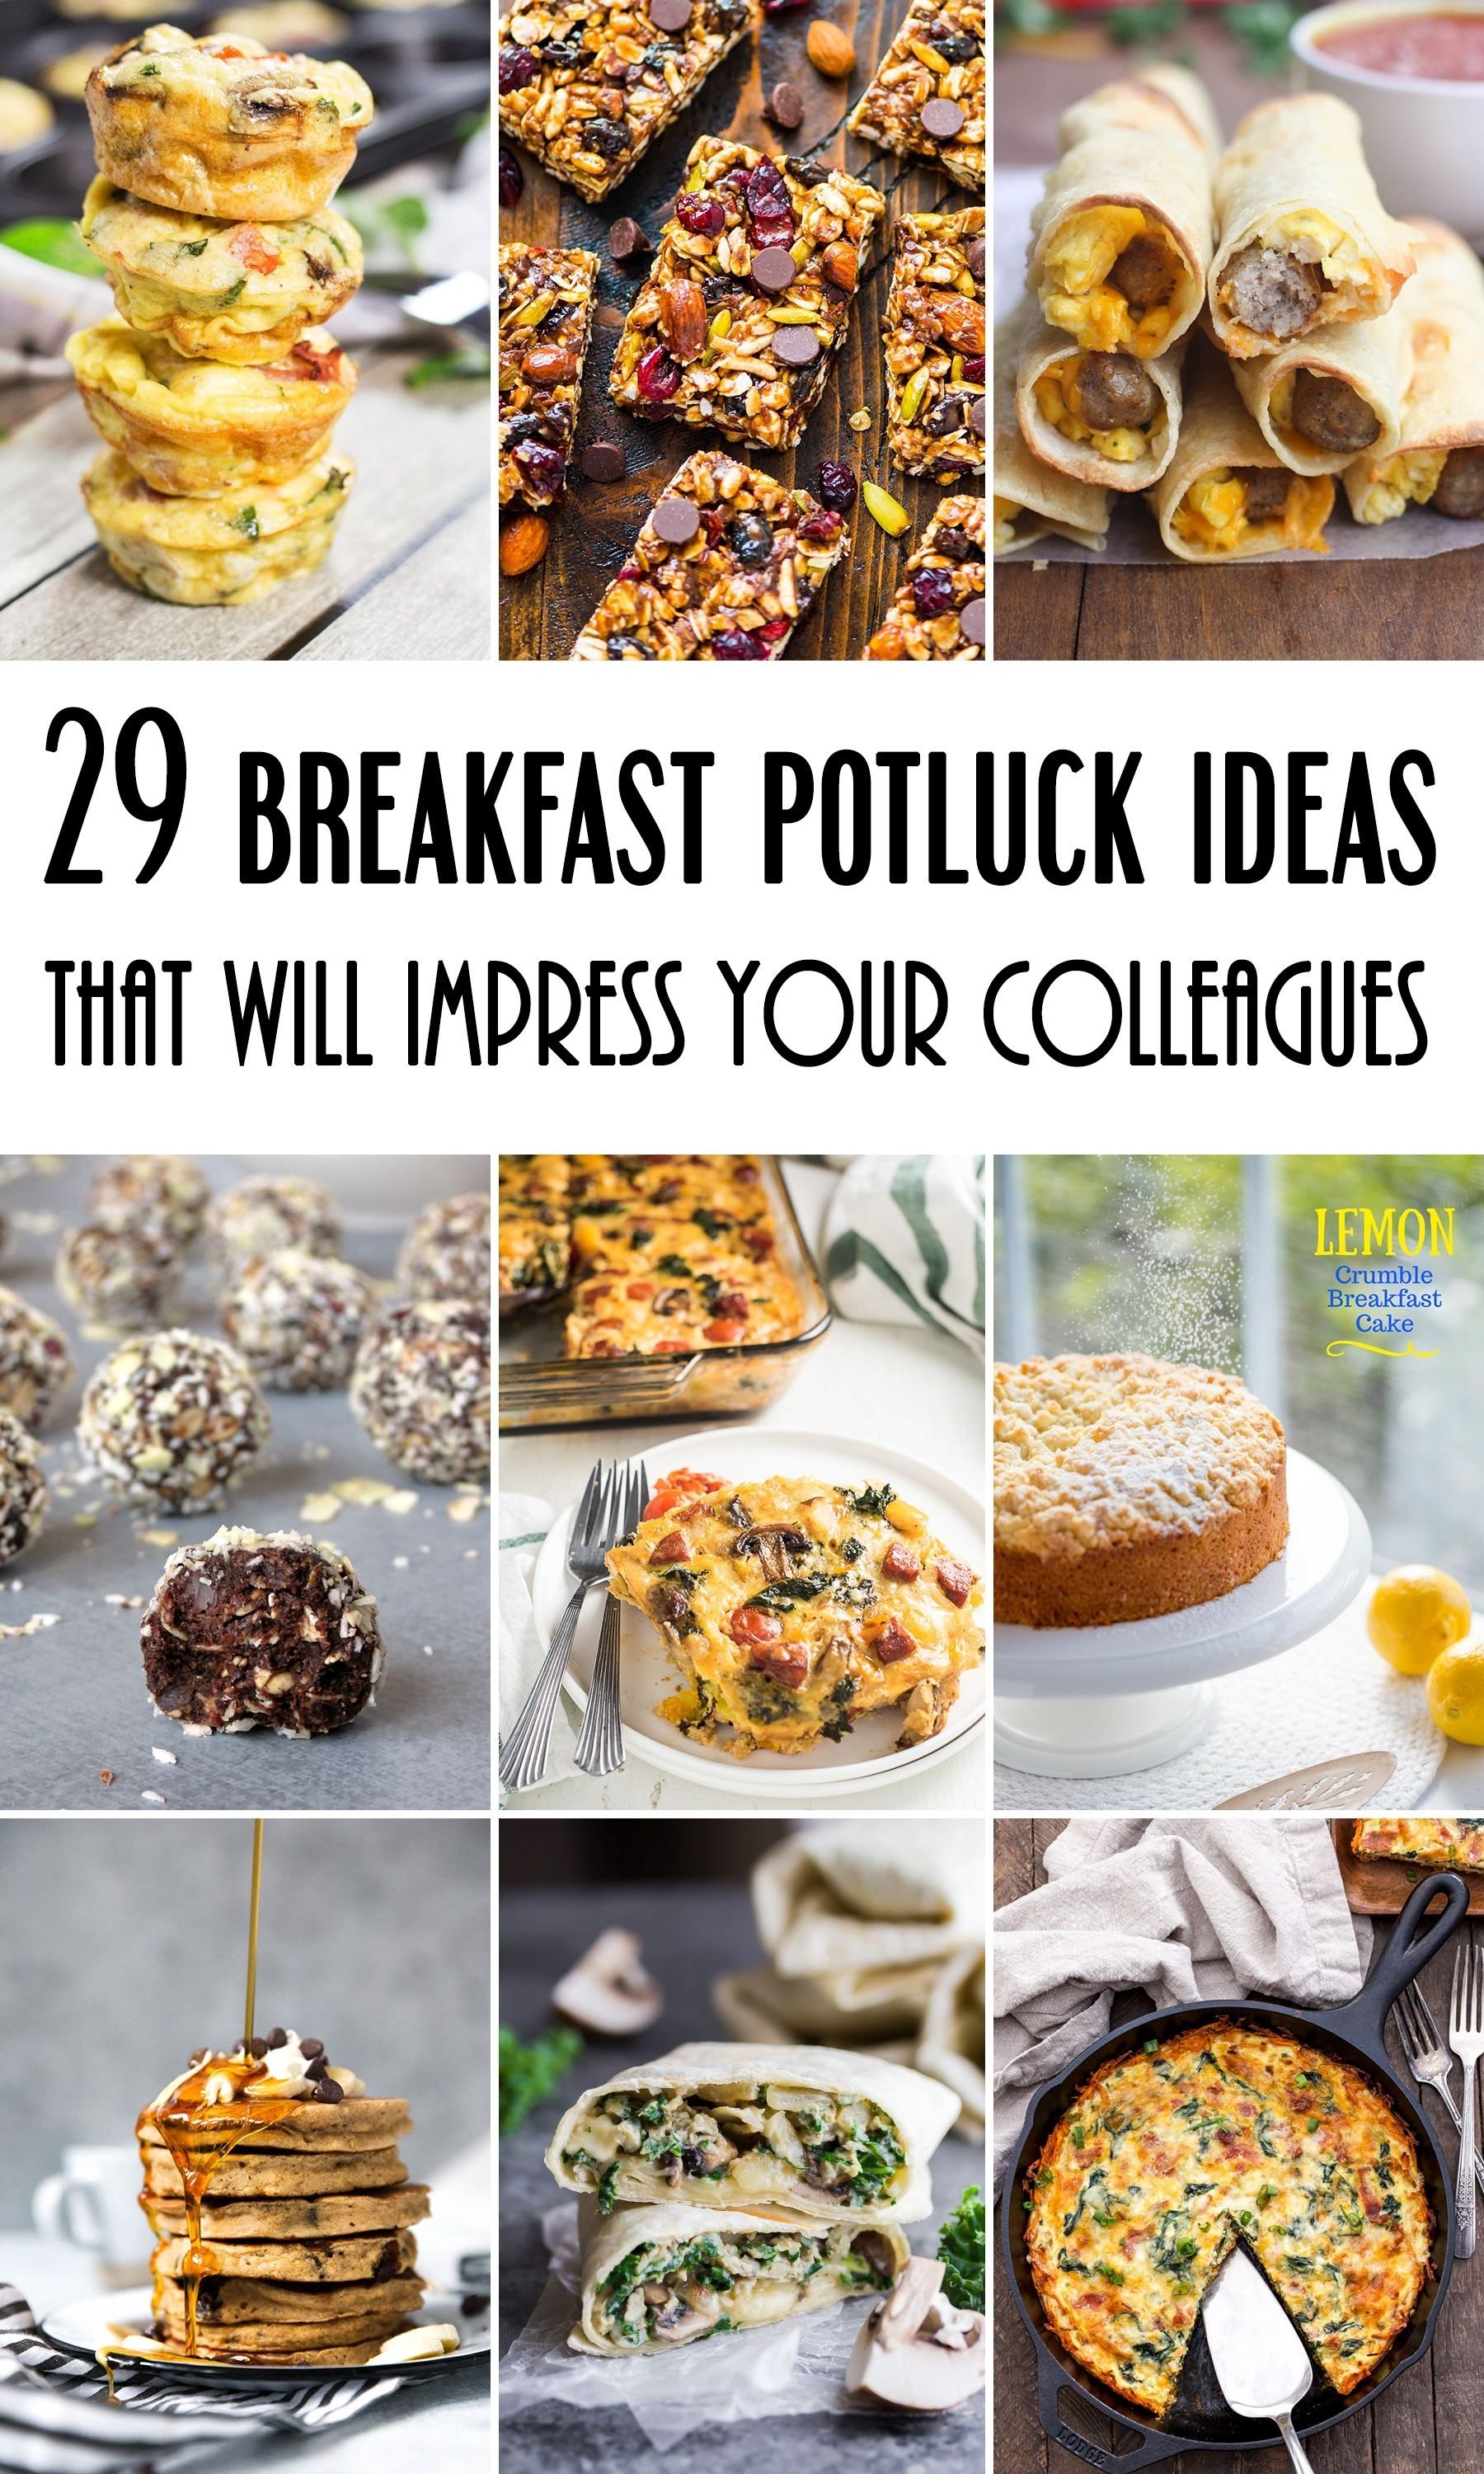 10 Lovable Potluck Ideas For Work Party 29 breakfast potluck ideas for work that will impress your 10 2022